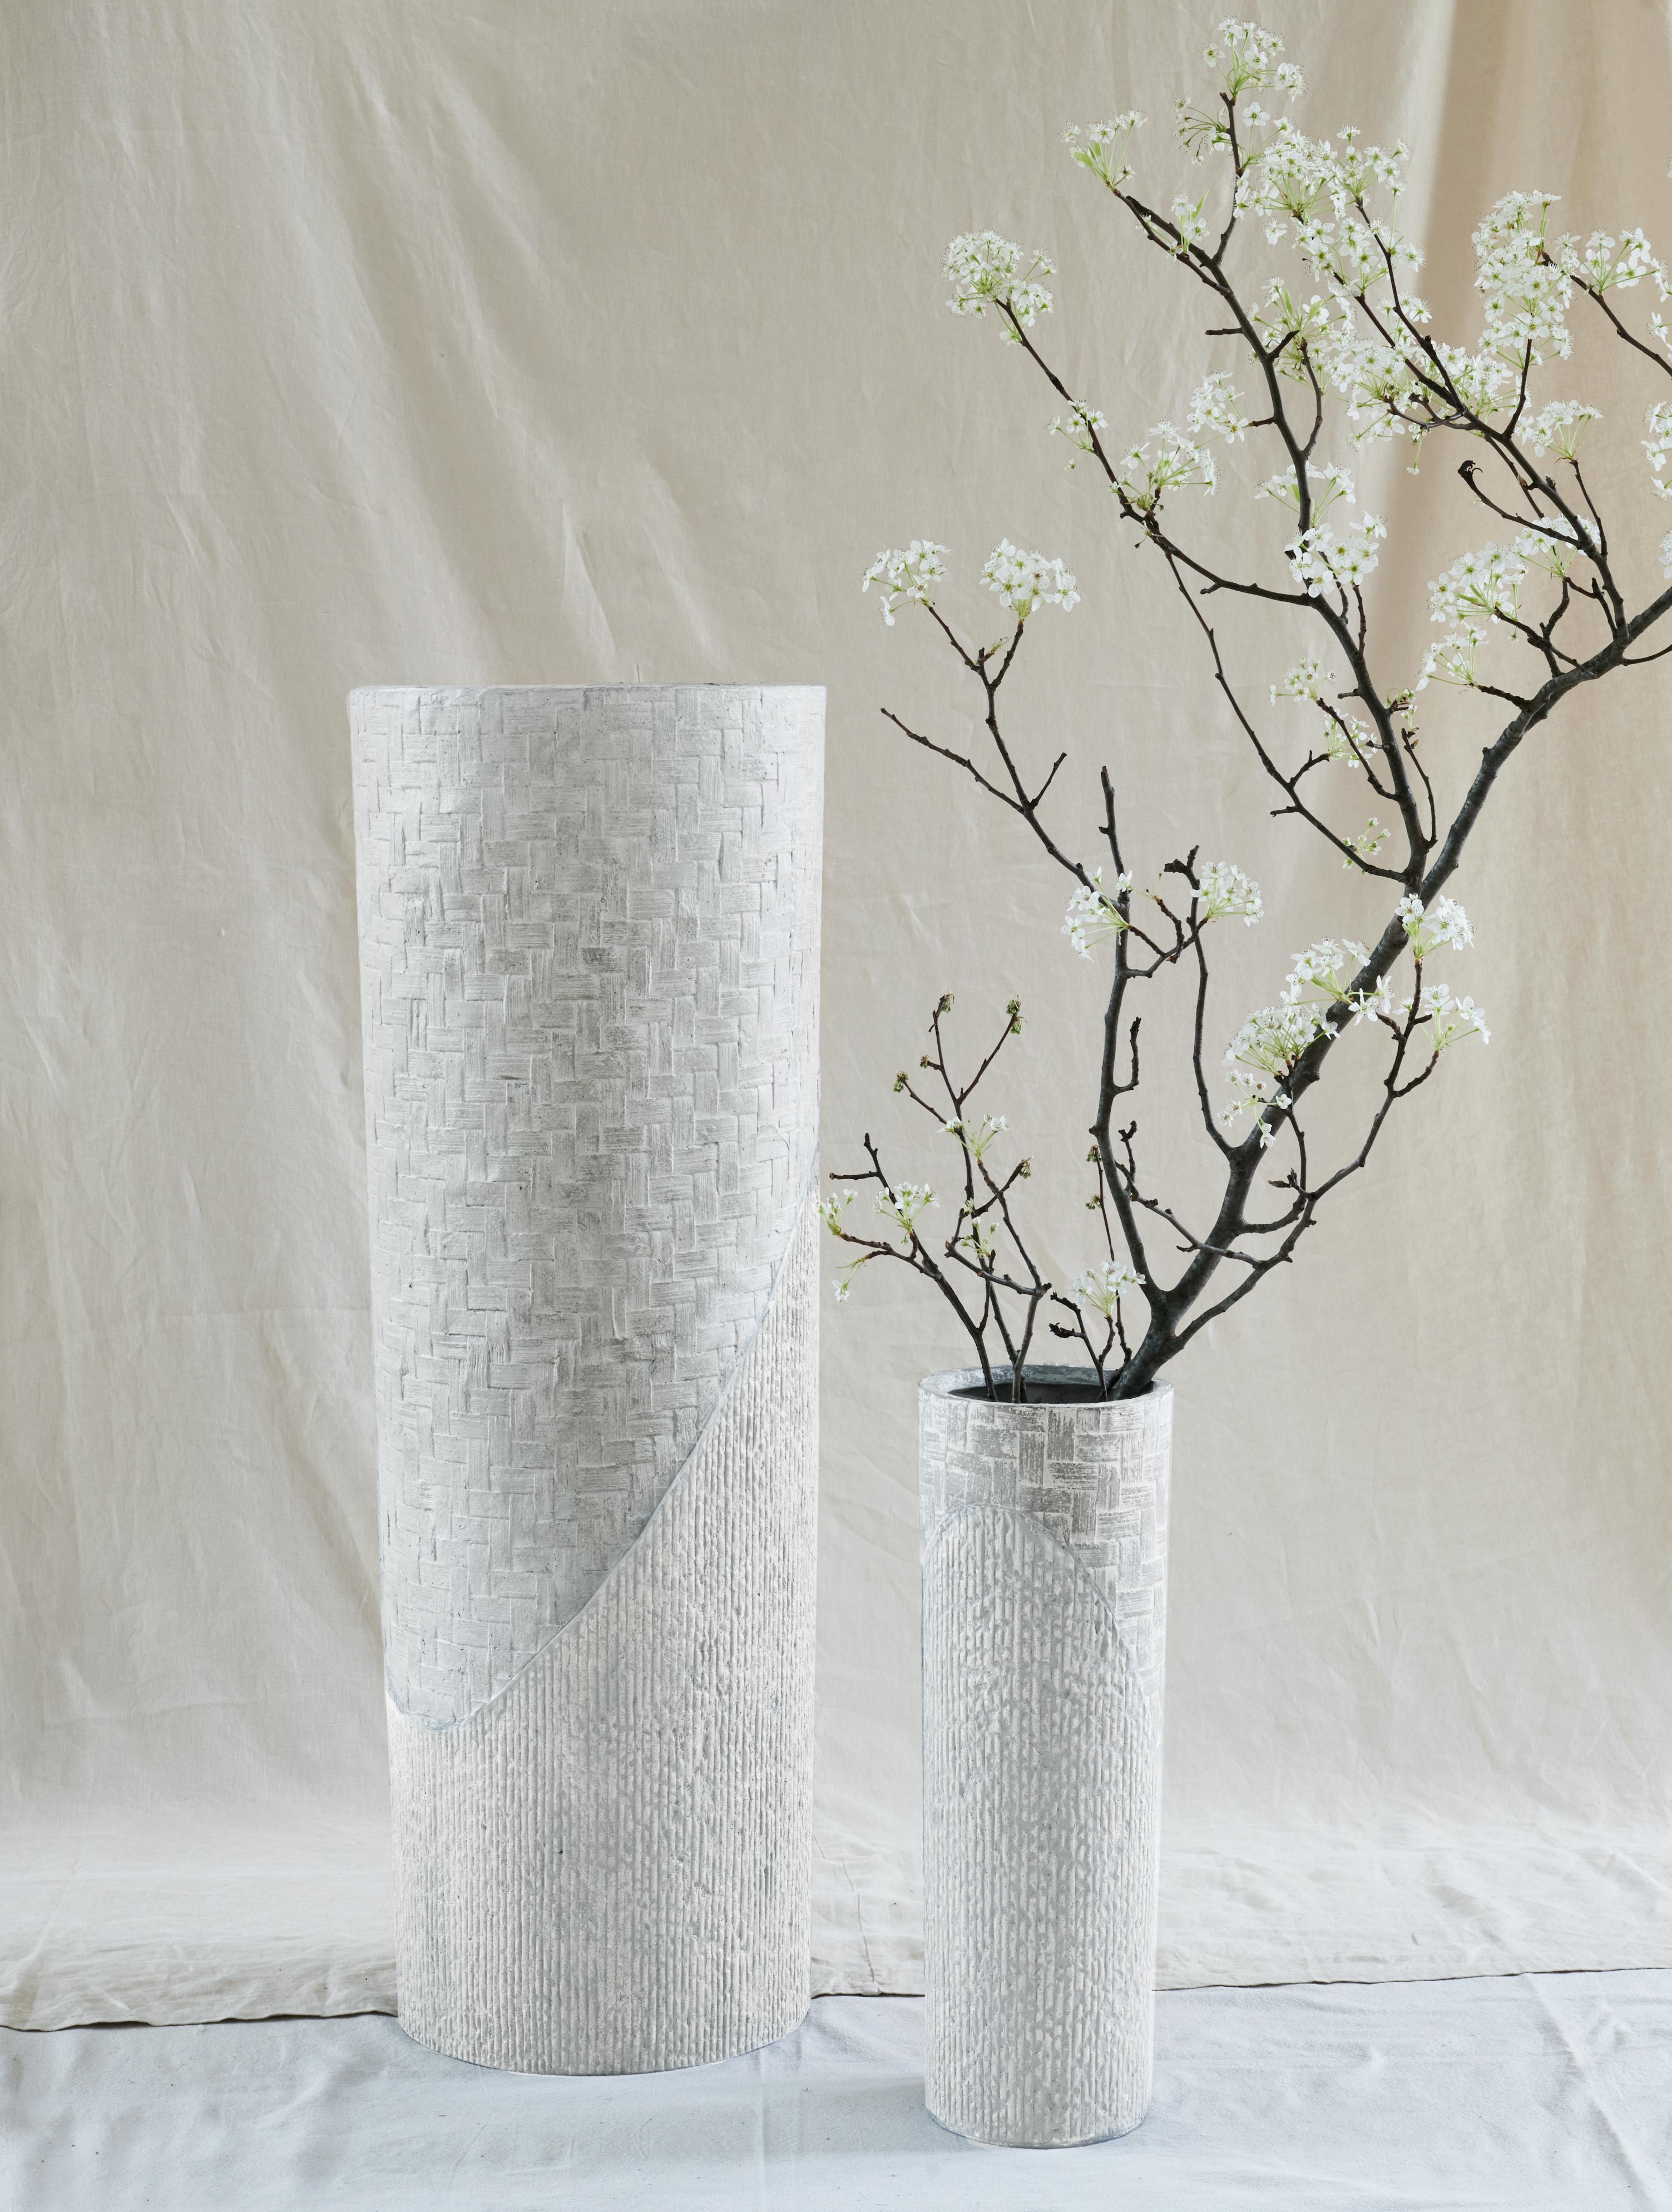 A tall, strikingly elegant cylindrical vessel featuring a subtle two-toned, dual-textured imprint.

For indoor or outdoor use.

15” W x 42.9” H x 15” D
38.1 x 109.2 x 38.1 cm
Materials: STONECAST® Natural Crushed Limestone & NUCAST® Recycled Paper